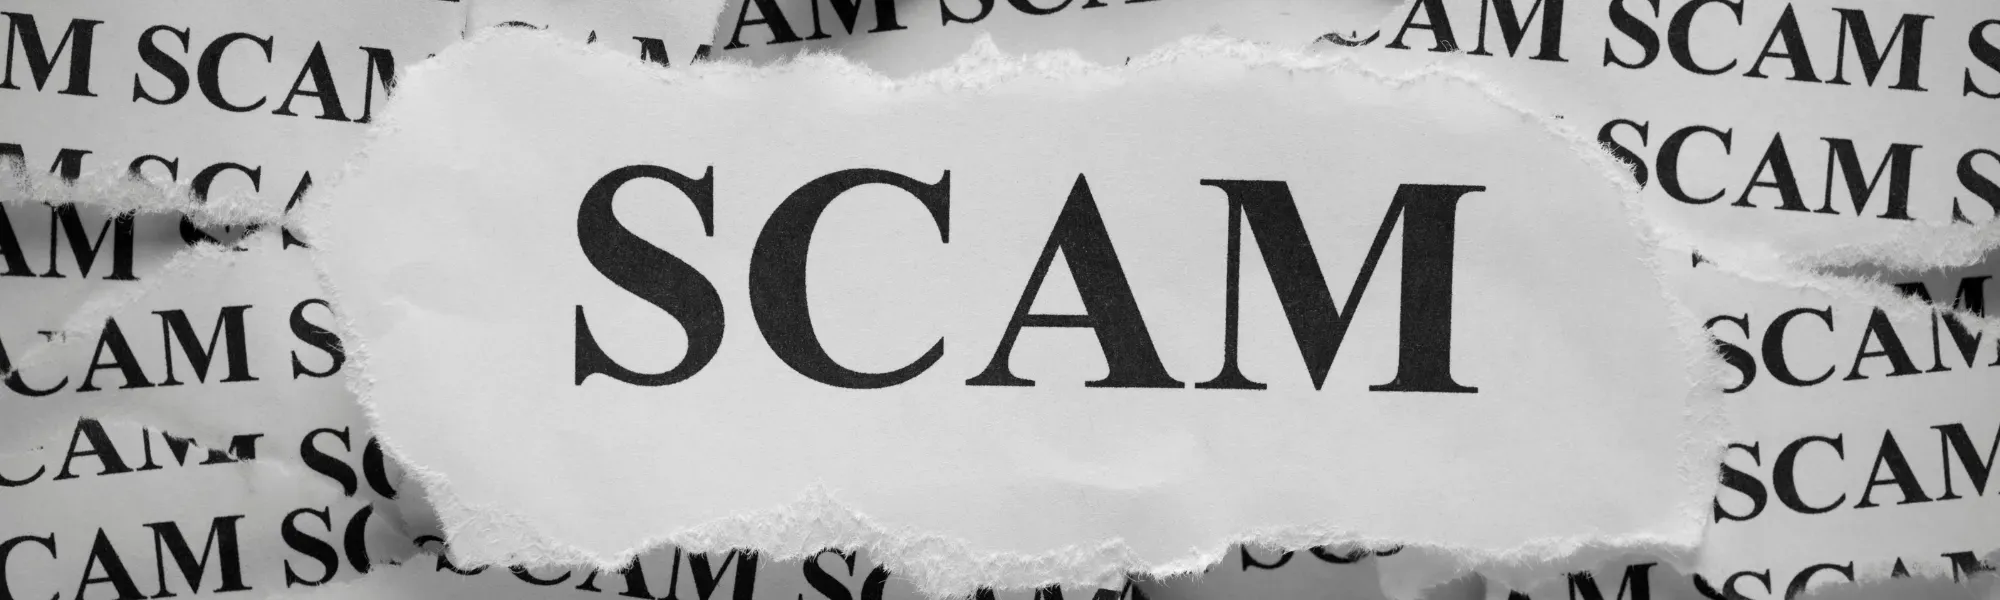 Beware: The Rise of Recruitment Scams Targeting Job Seekers